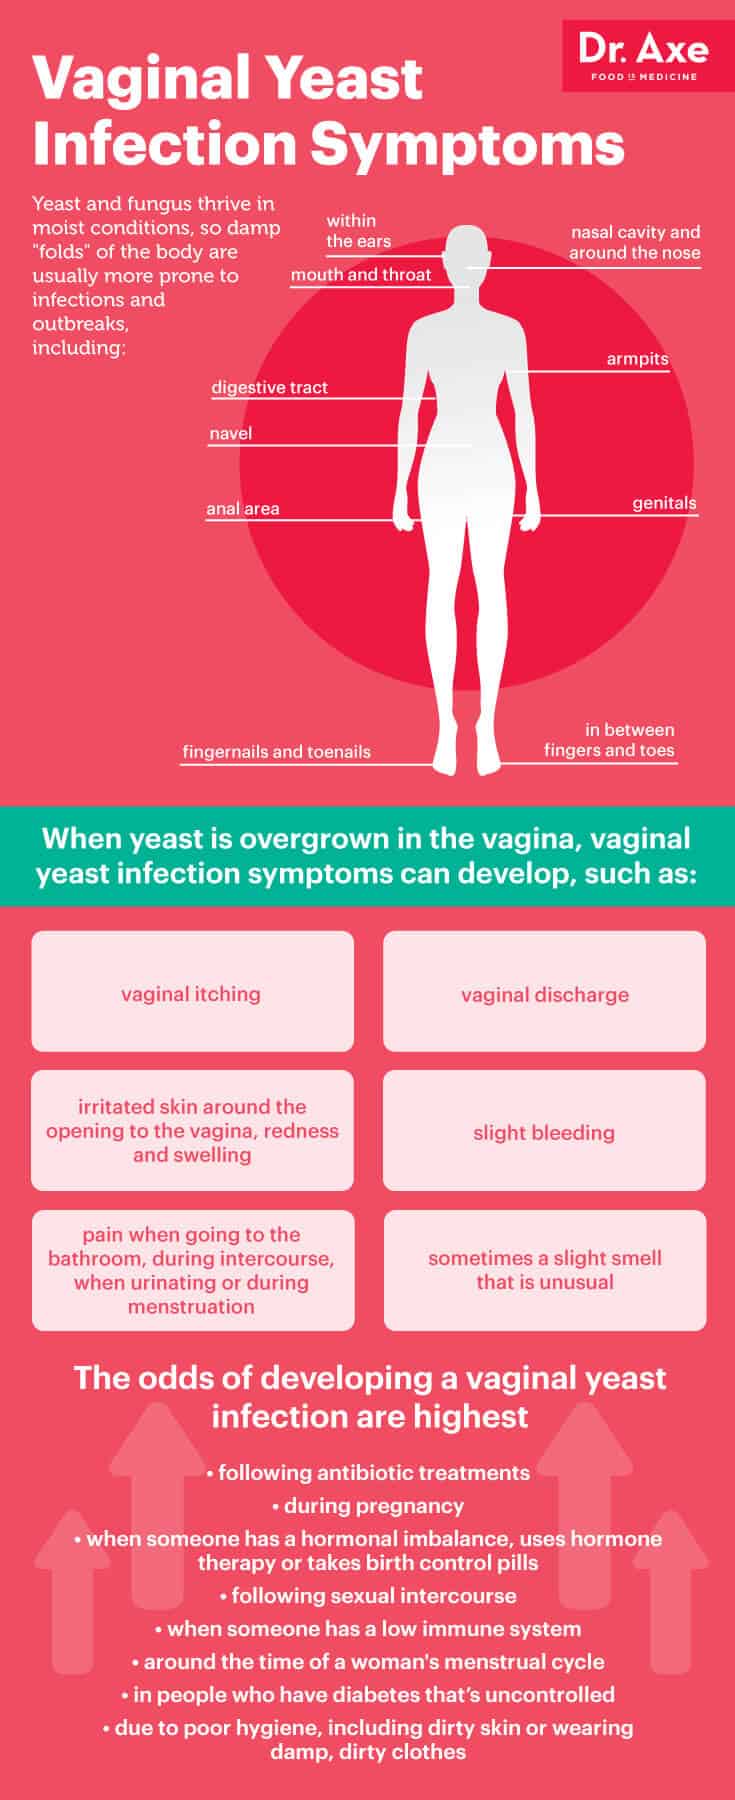 Vaginal Yeast Infection 6 Natural Ways To Get Rid Of It For Good Dr Axe 7258